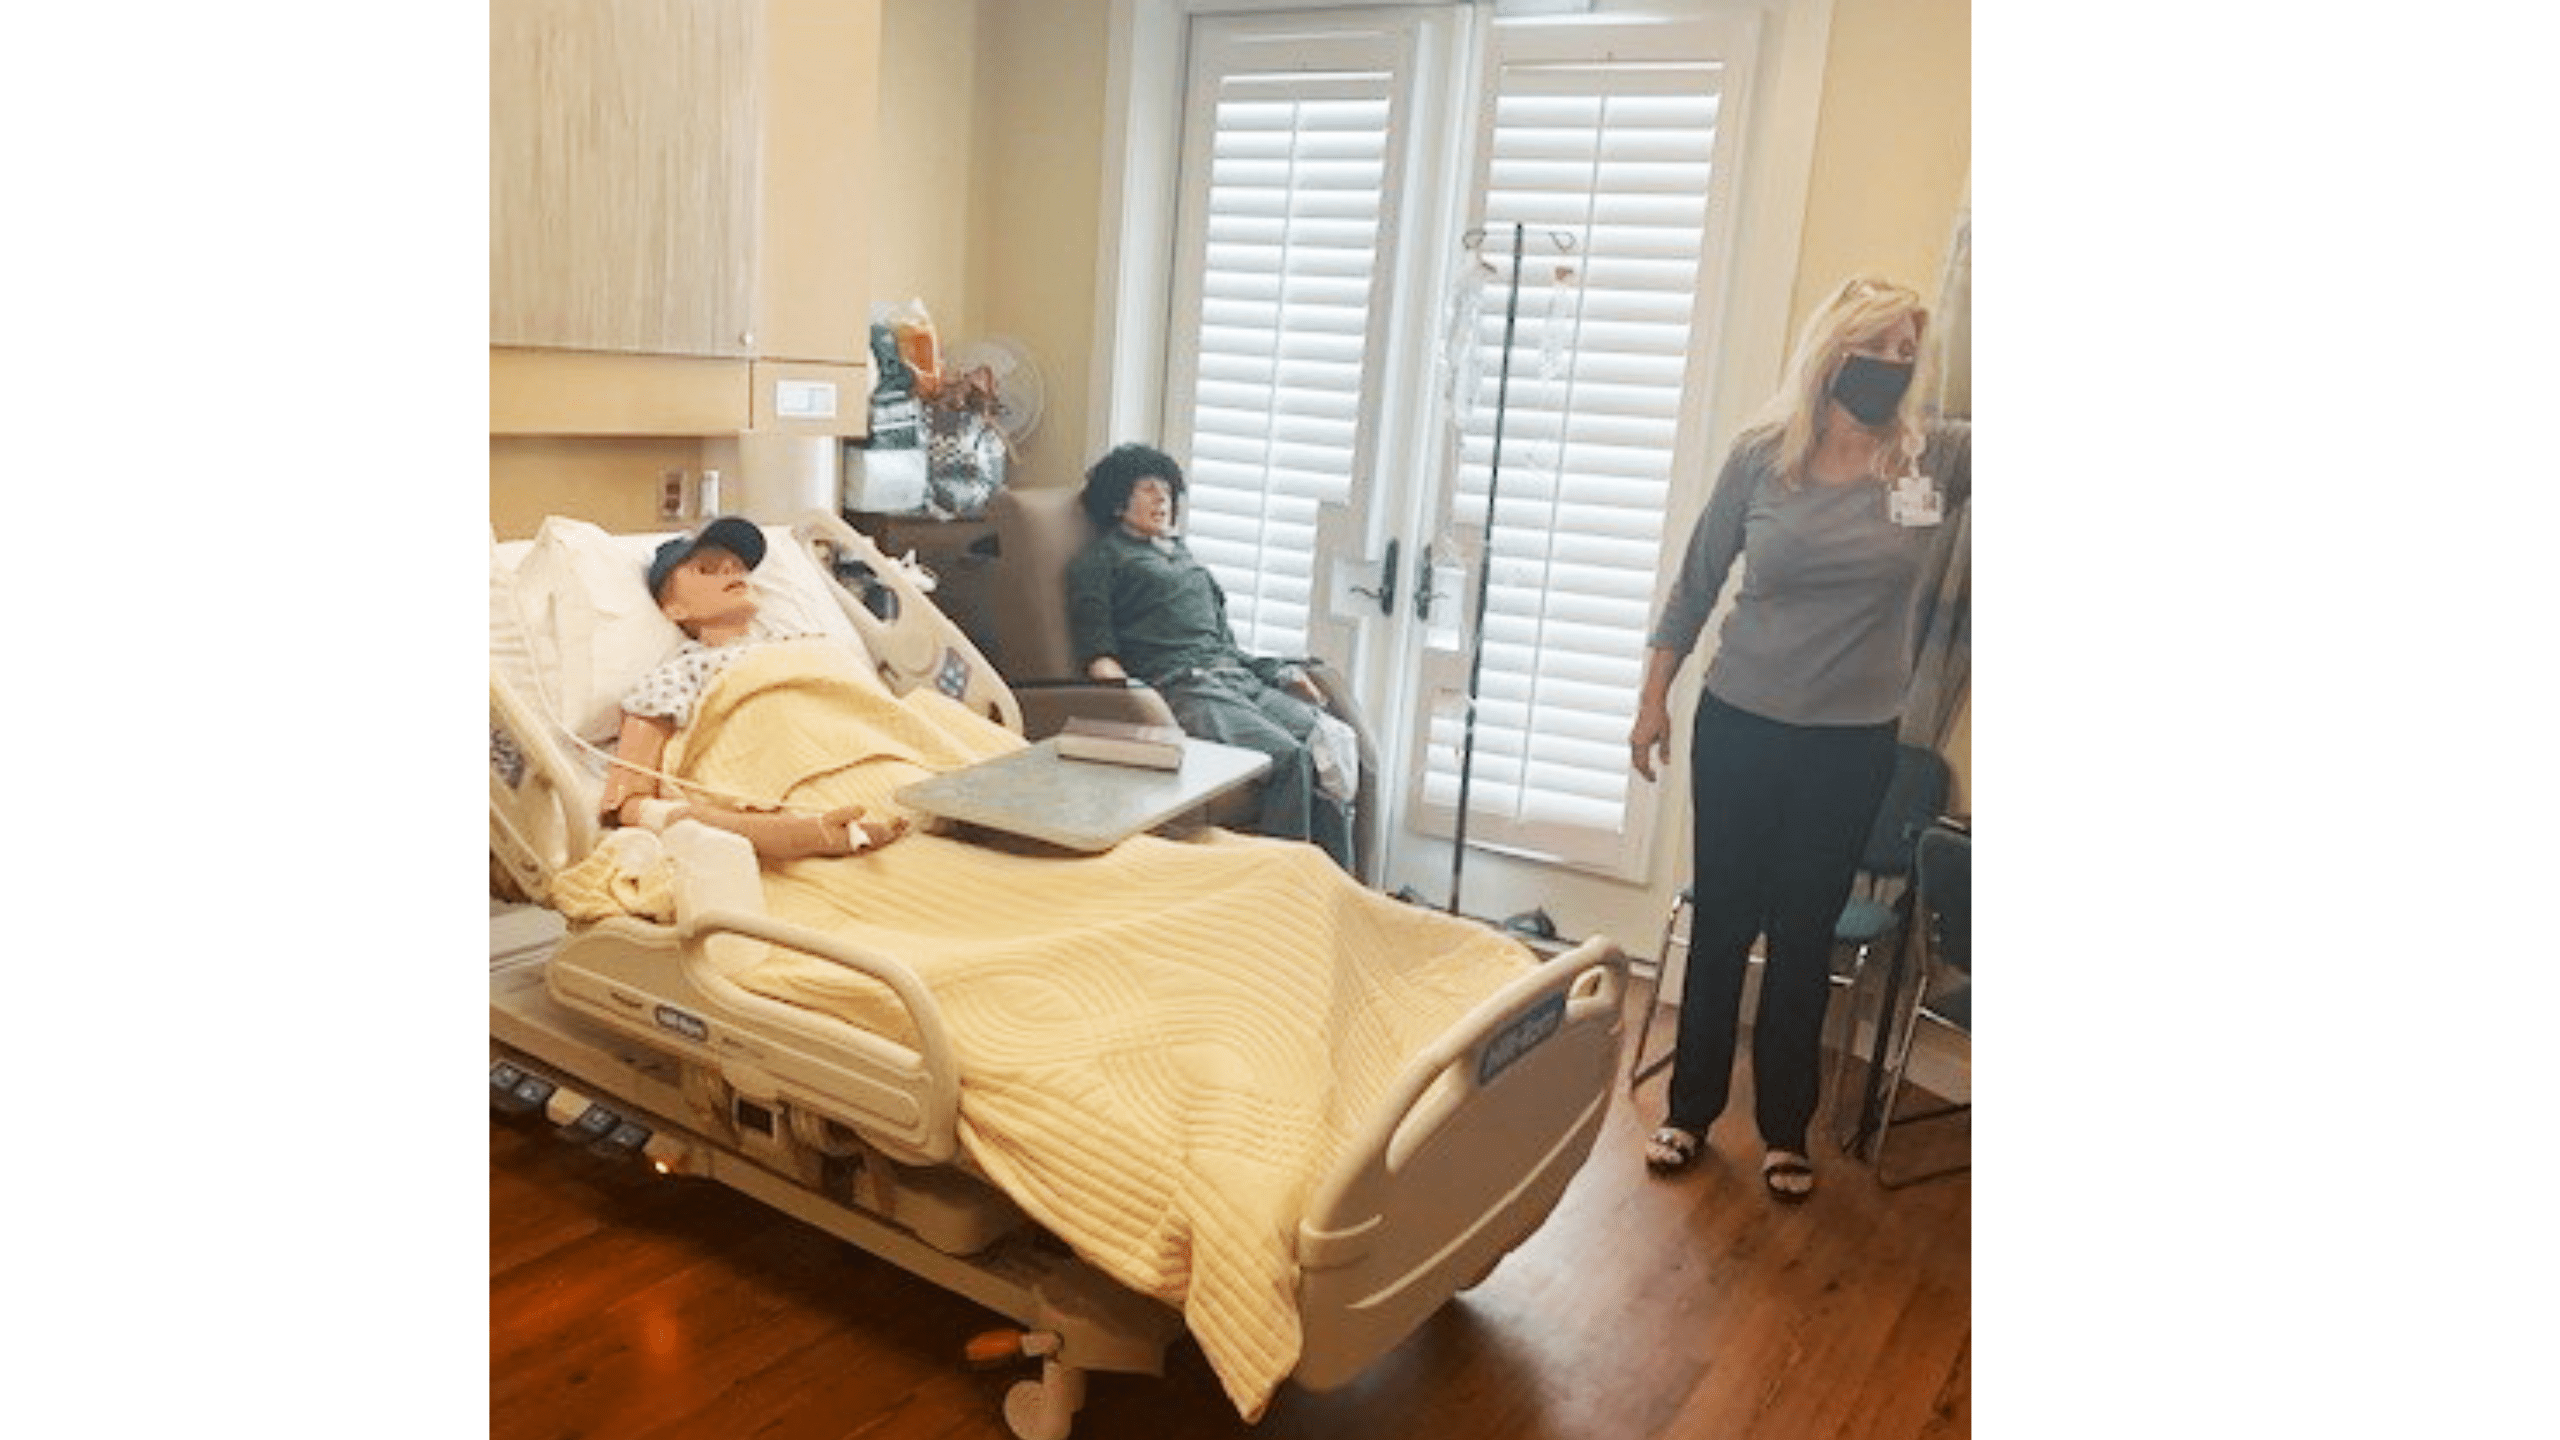 Hospice & Home Care Foundation of North Carolina uses an innovative pilot program to build the pipeline of nurses in home health and hospice care